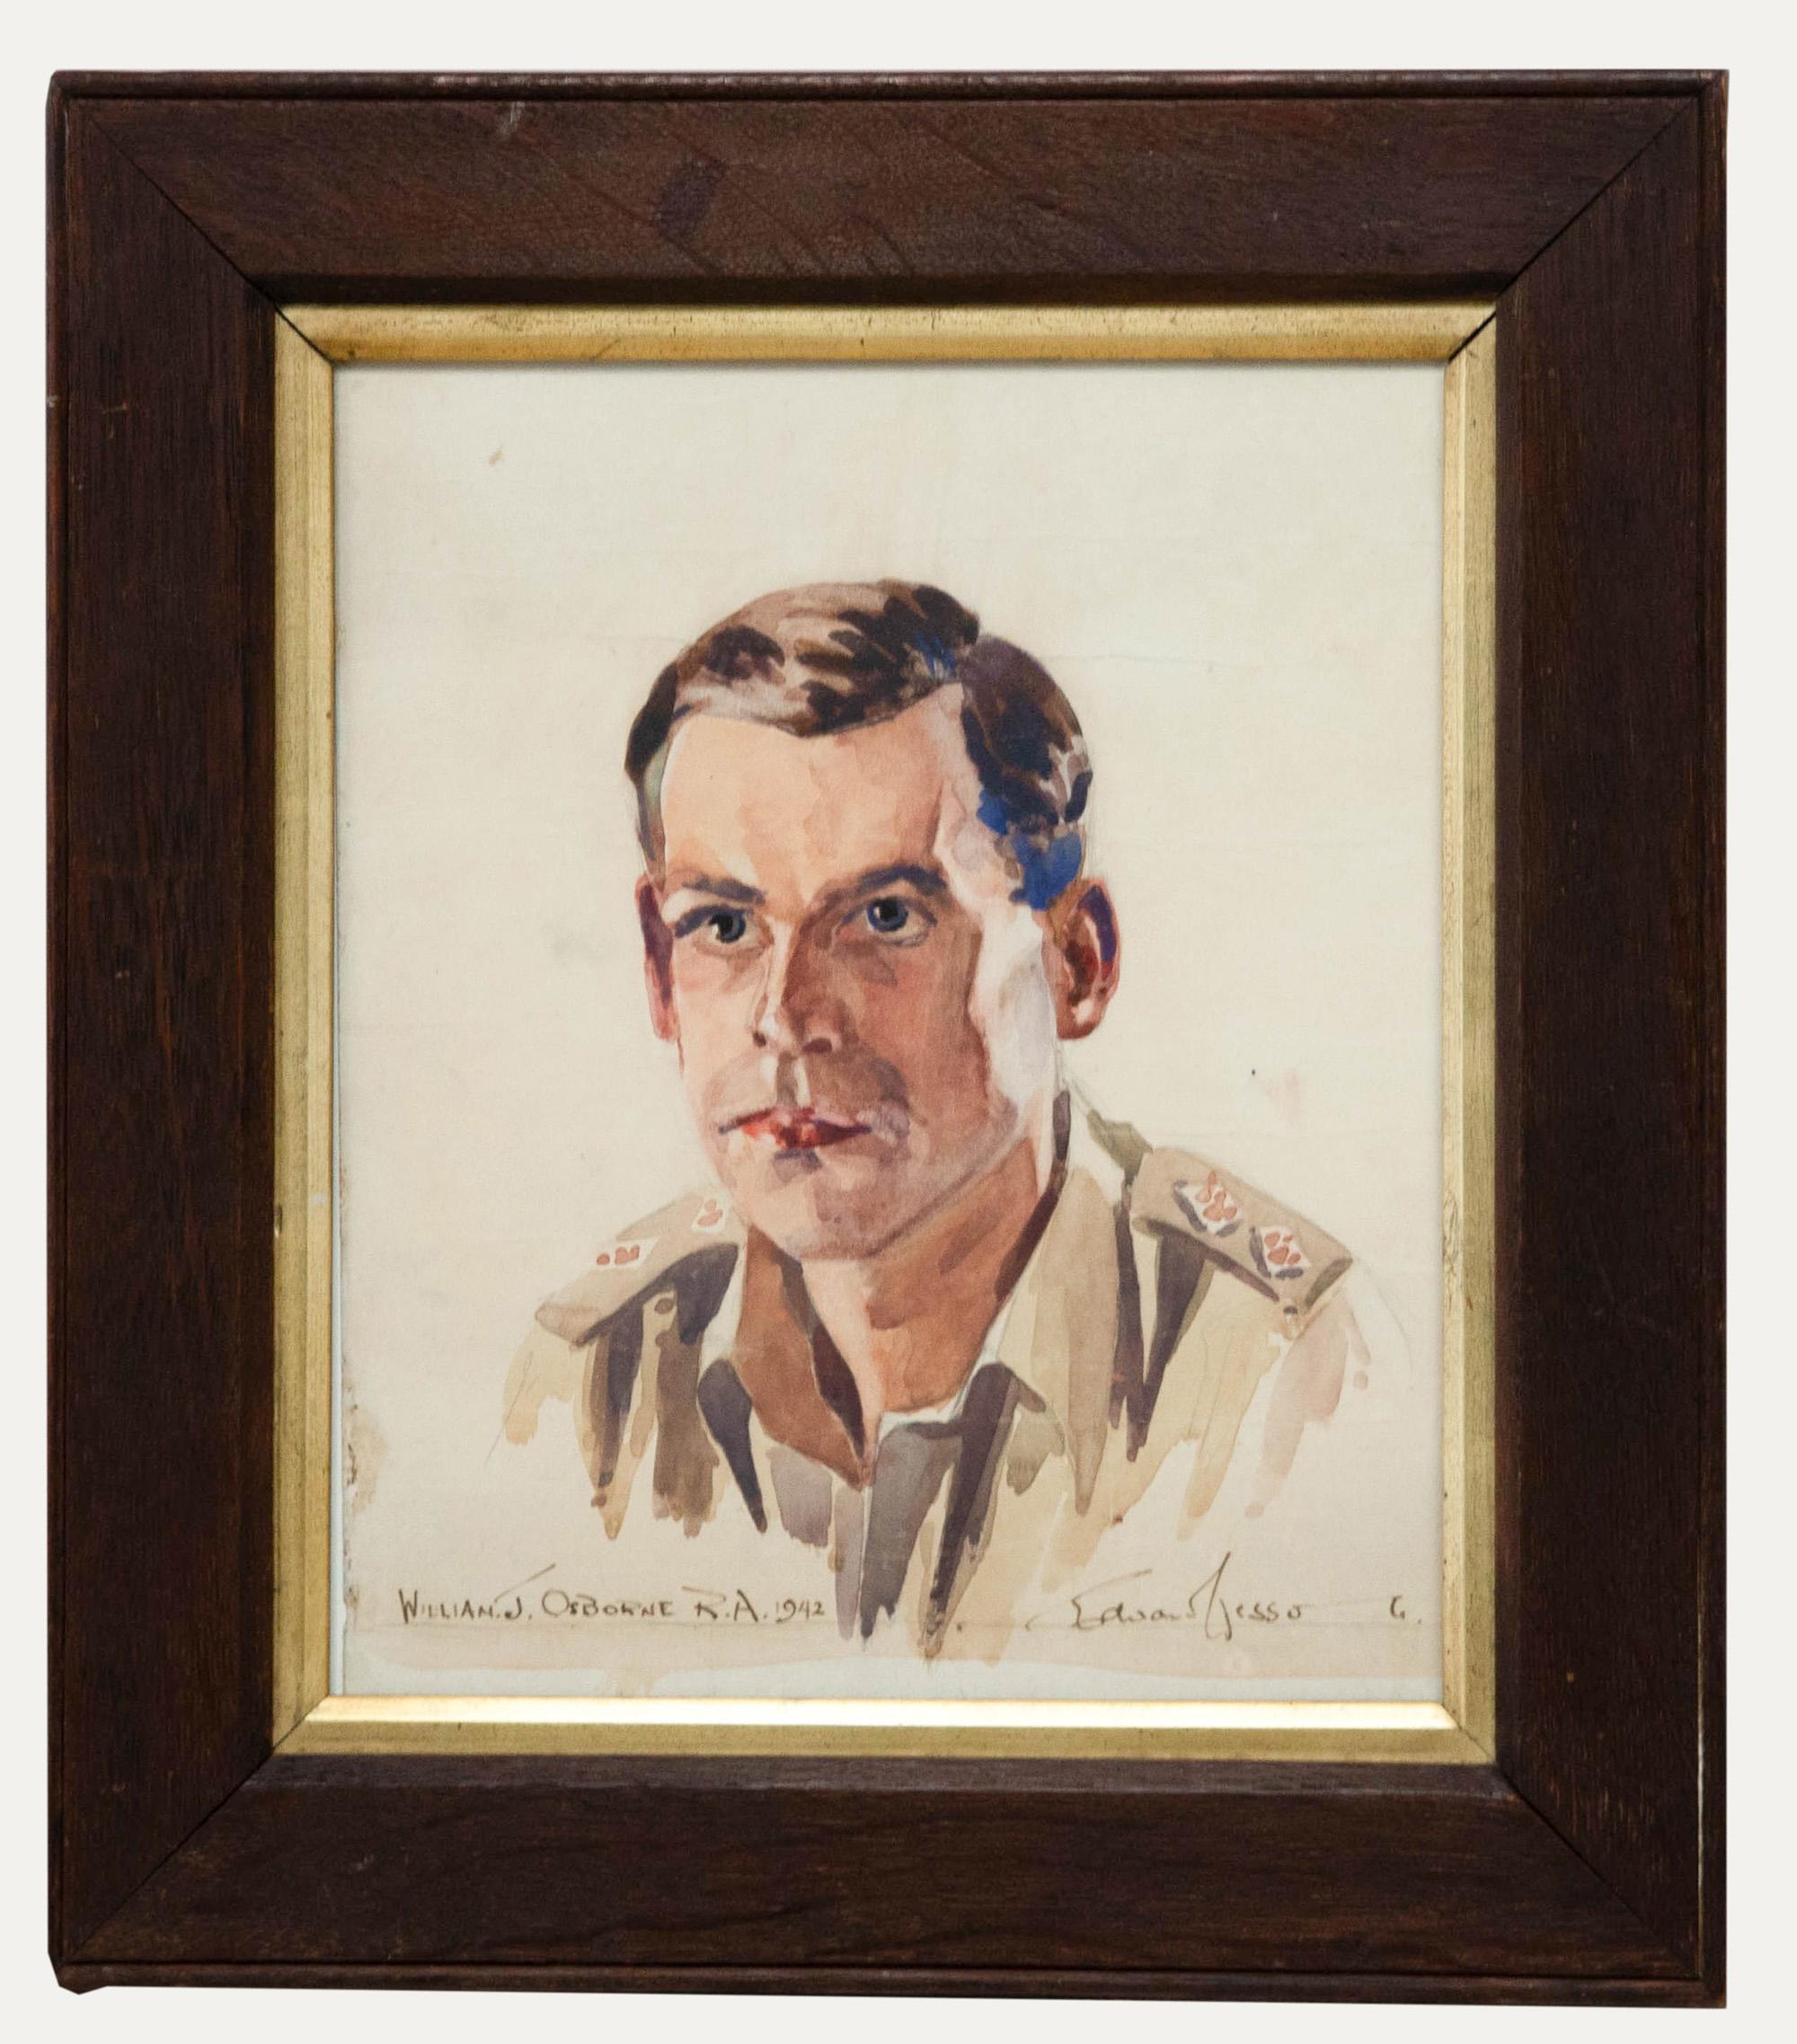 An accomplished watercolour portrait of William J. Osbourne of the Royal Artillery. Here, Wesson captures William in gestural brush strokes, giving the portrait a wonderful loose and relaxed feeling. The watercolour has been presented in a heavy oak